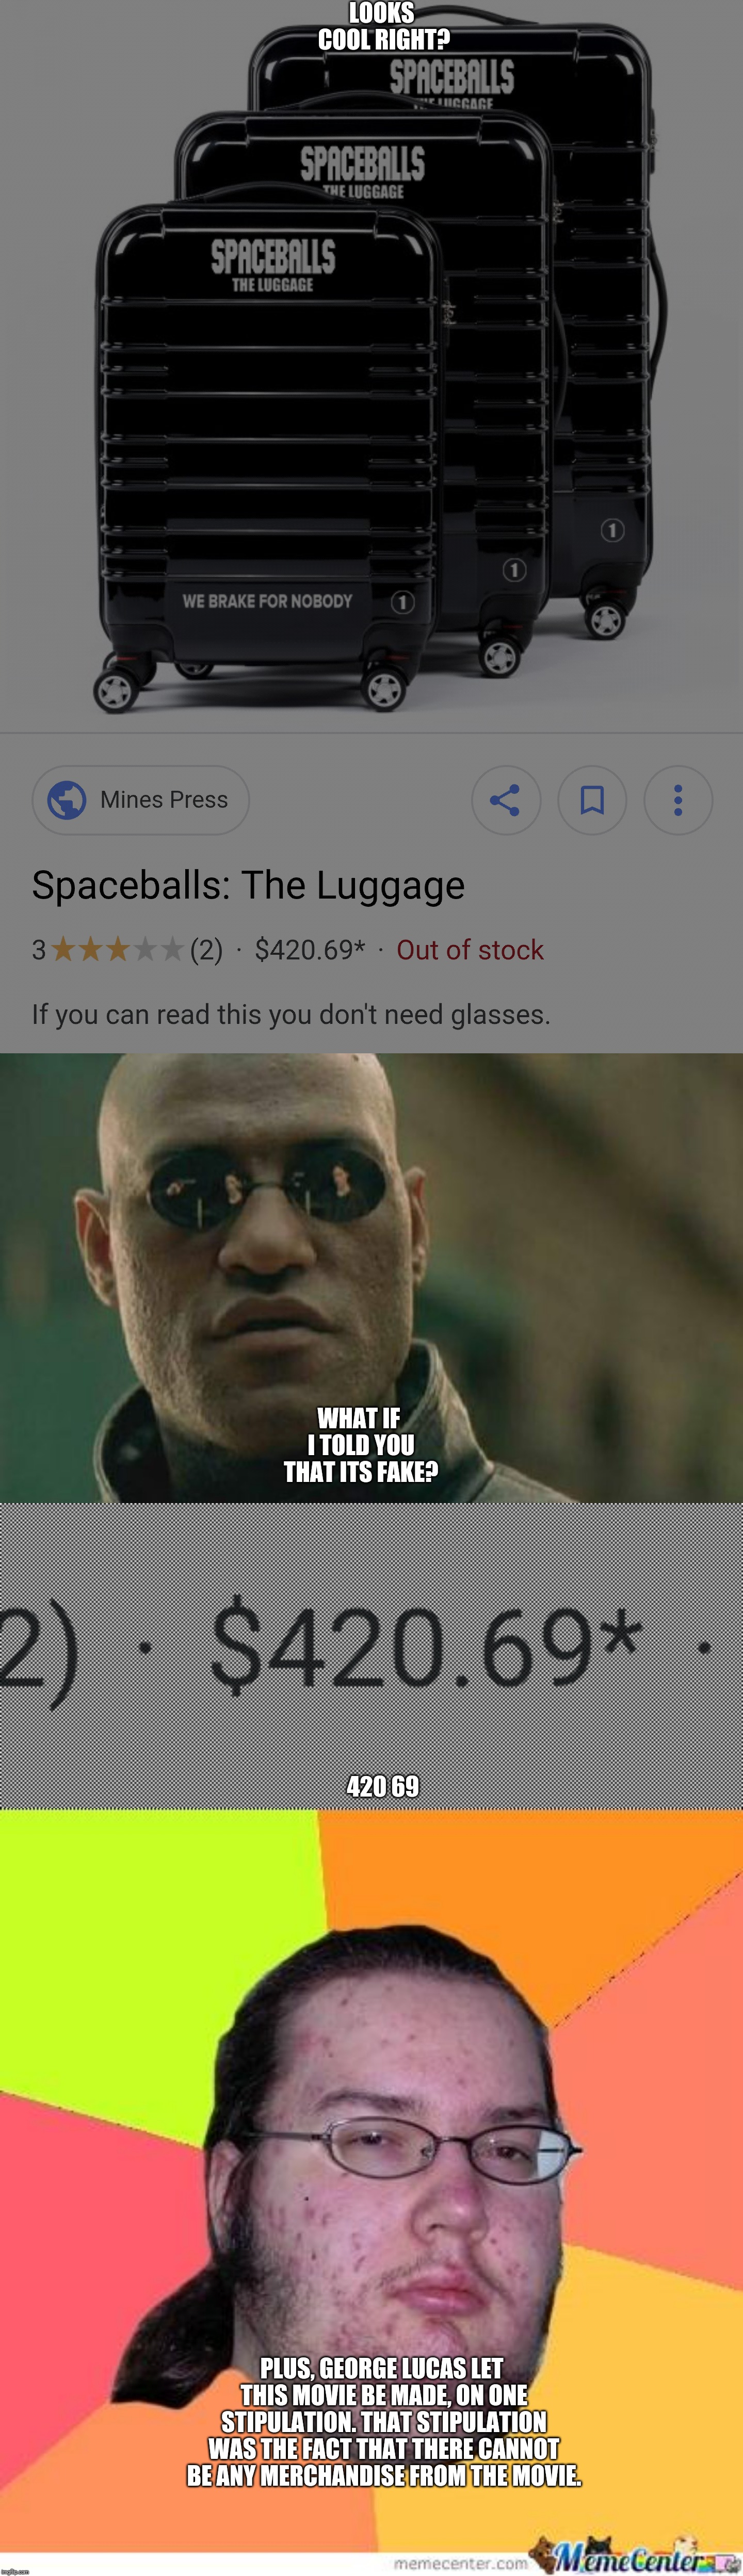 LOOKS COOL RIGHT? WHAT IF I TOLD YOU THAT ITS FAKE? 420 69; PLUS, GEORGE LUCAS LET THIS MOVIE BE MADE, ON ONE STIPULATION. THAT STIPULATION WAS THE FACT THAT THERE CANNOT BE ANY MERCHANDISE FROM THE MOVIE. | image tagged in memes,matrix morpheus,nerd | made w/ Imgflip meme maker